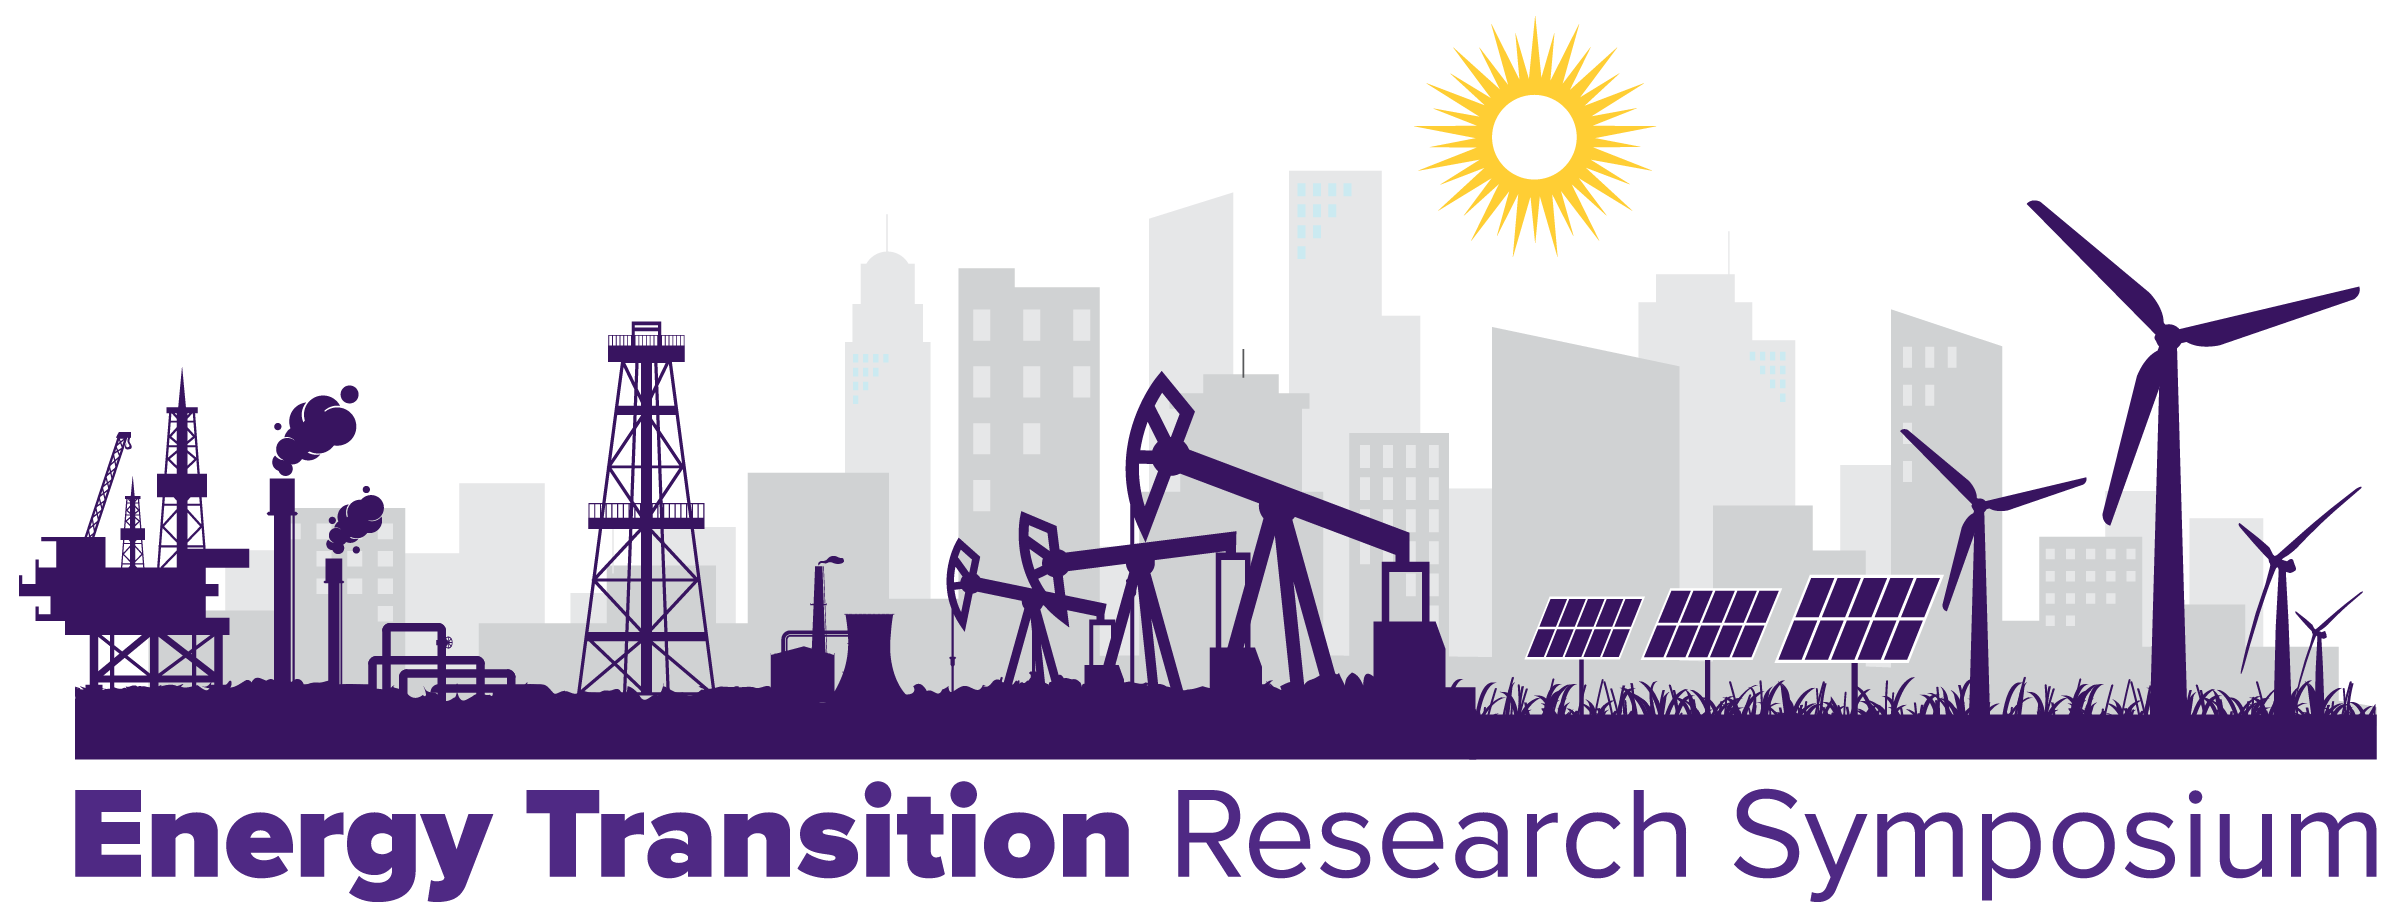 energy transition image with oil rig, solar panels, windmills